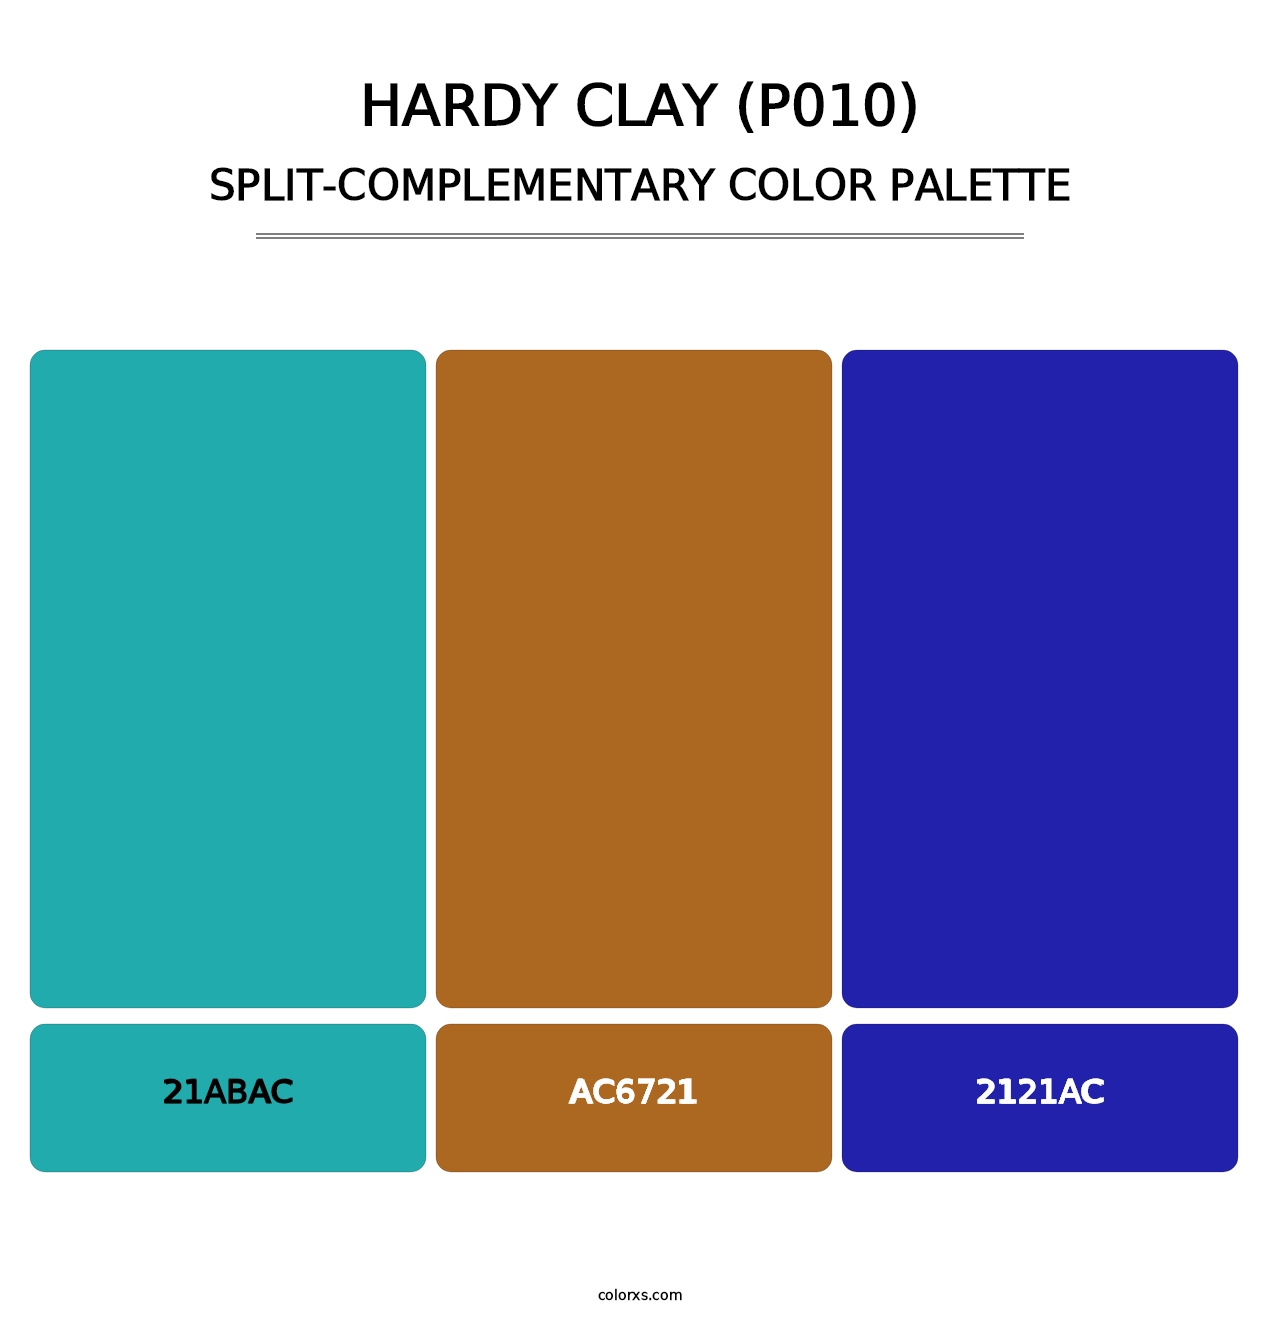 Hardy Clay (P010) - Split-Complementary Color Palette